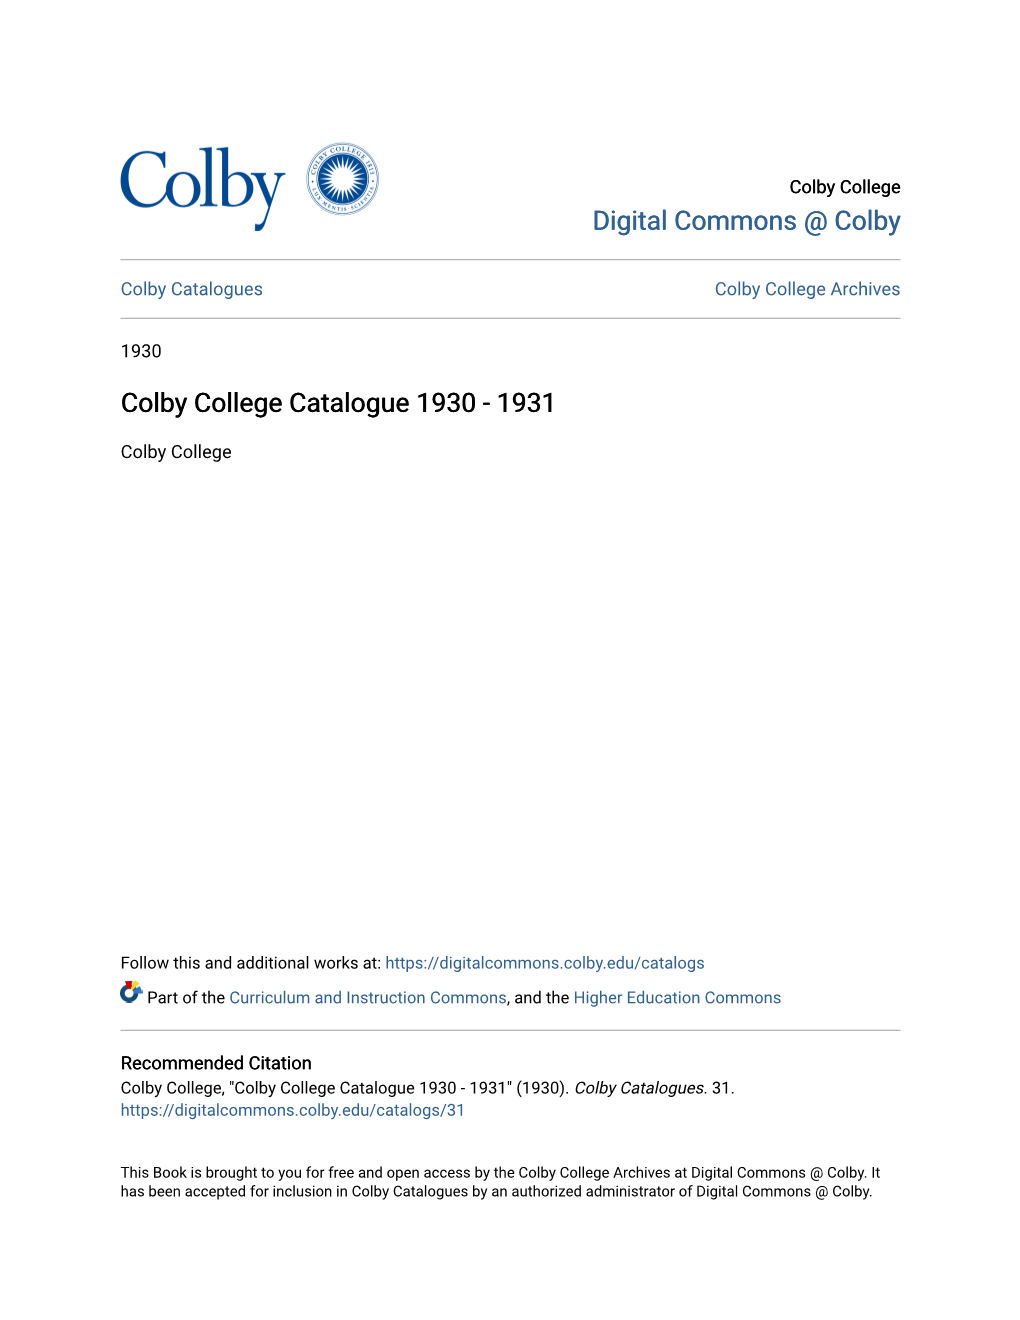 Colby College Catalogue 1930 - 1931